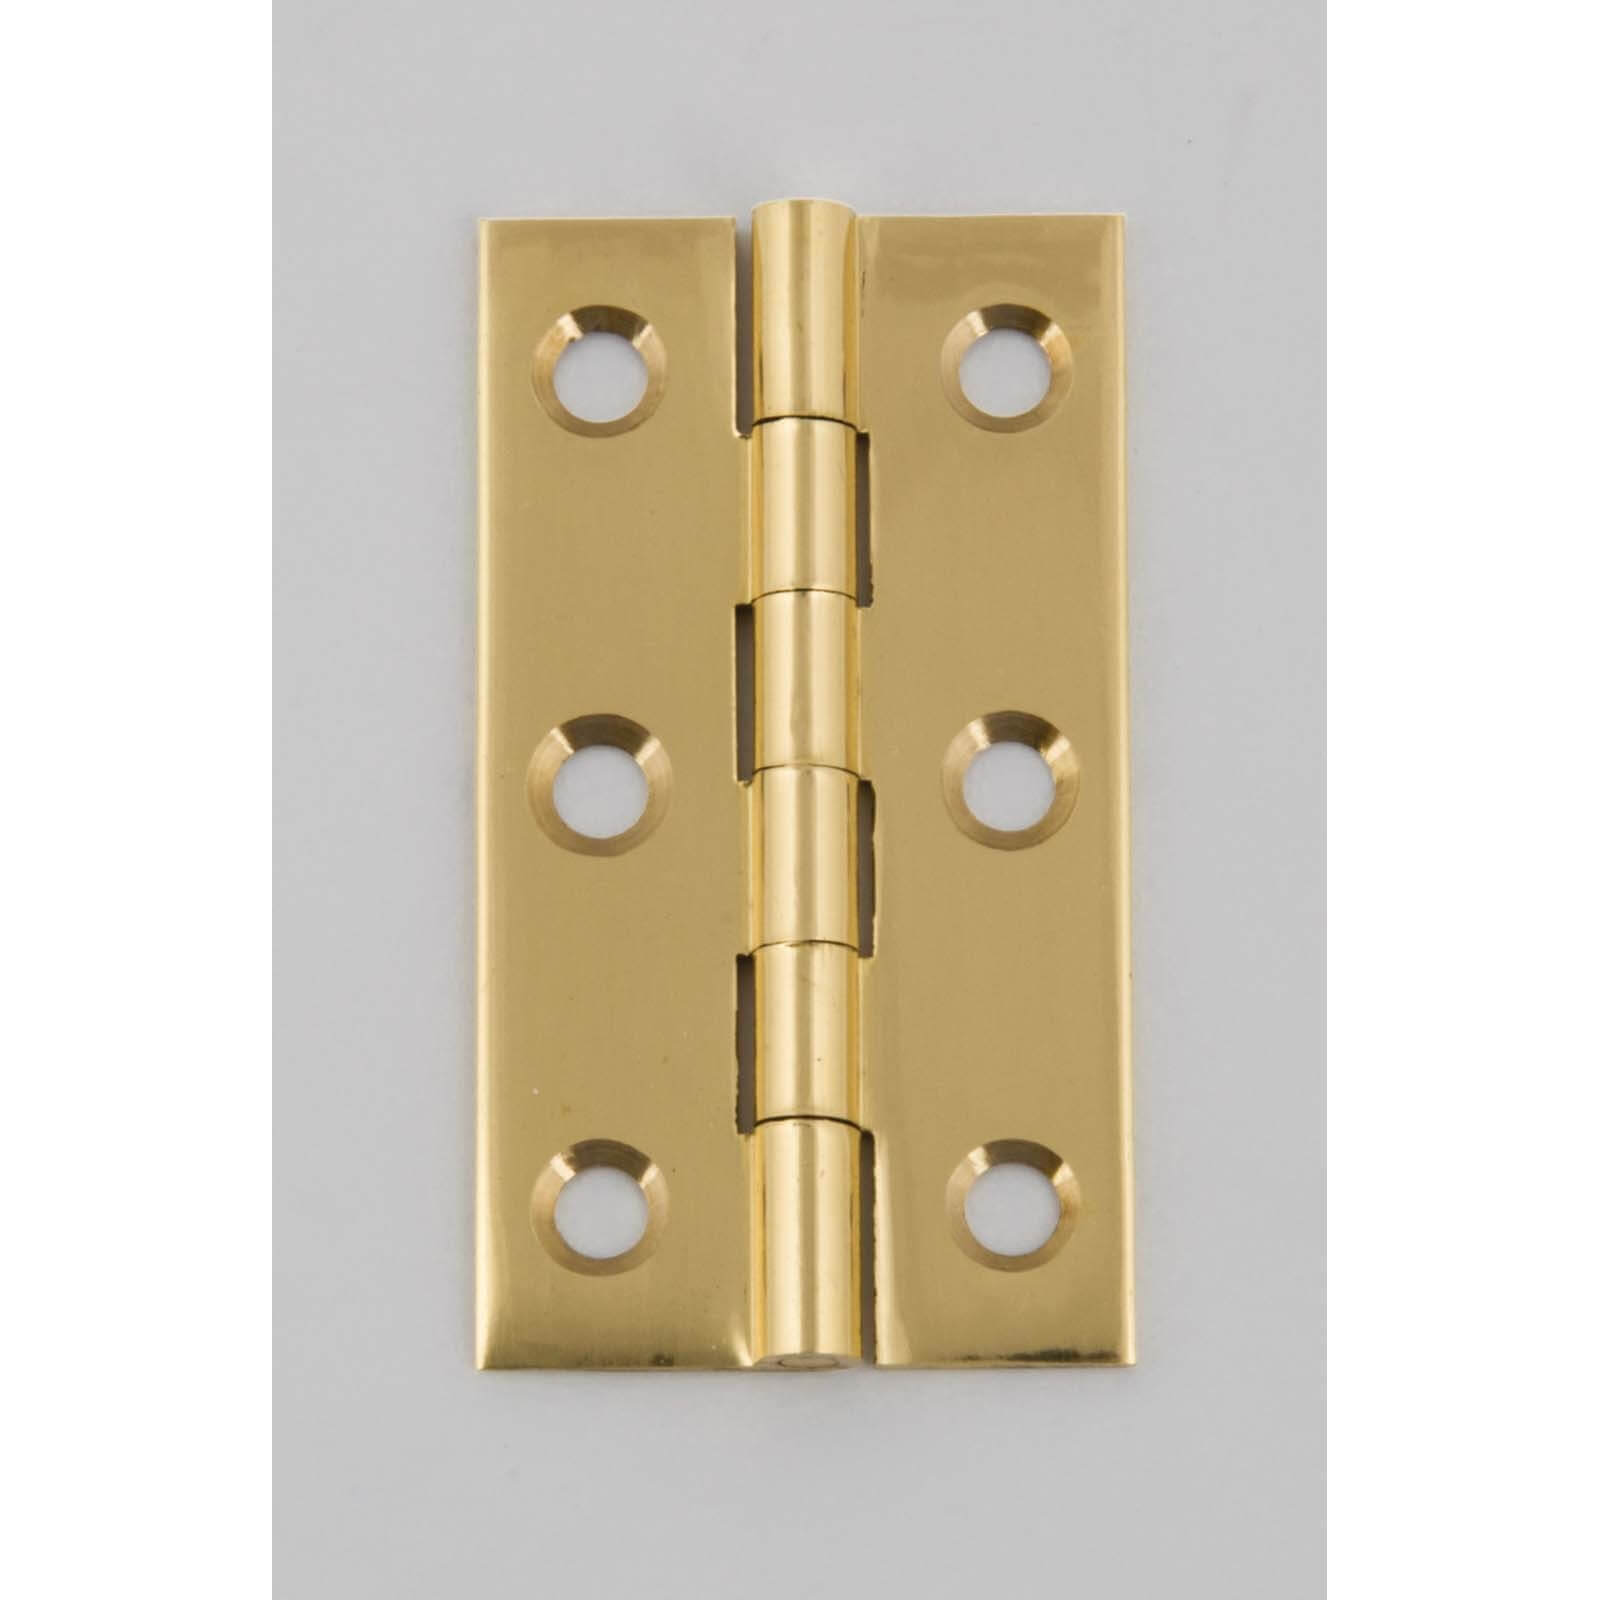 Hafele Solid Drawn Butt Hinge - Polished Brass - 50 x 28mm - 2 Pack